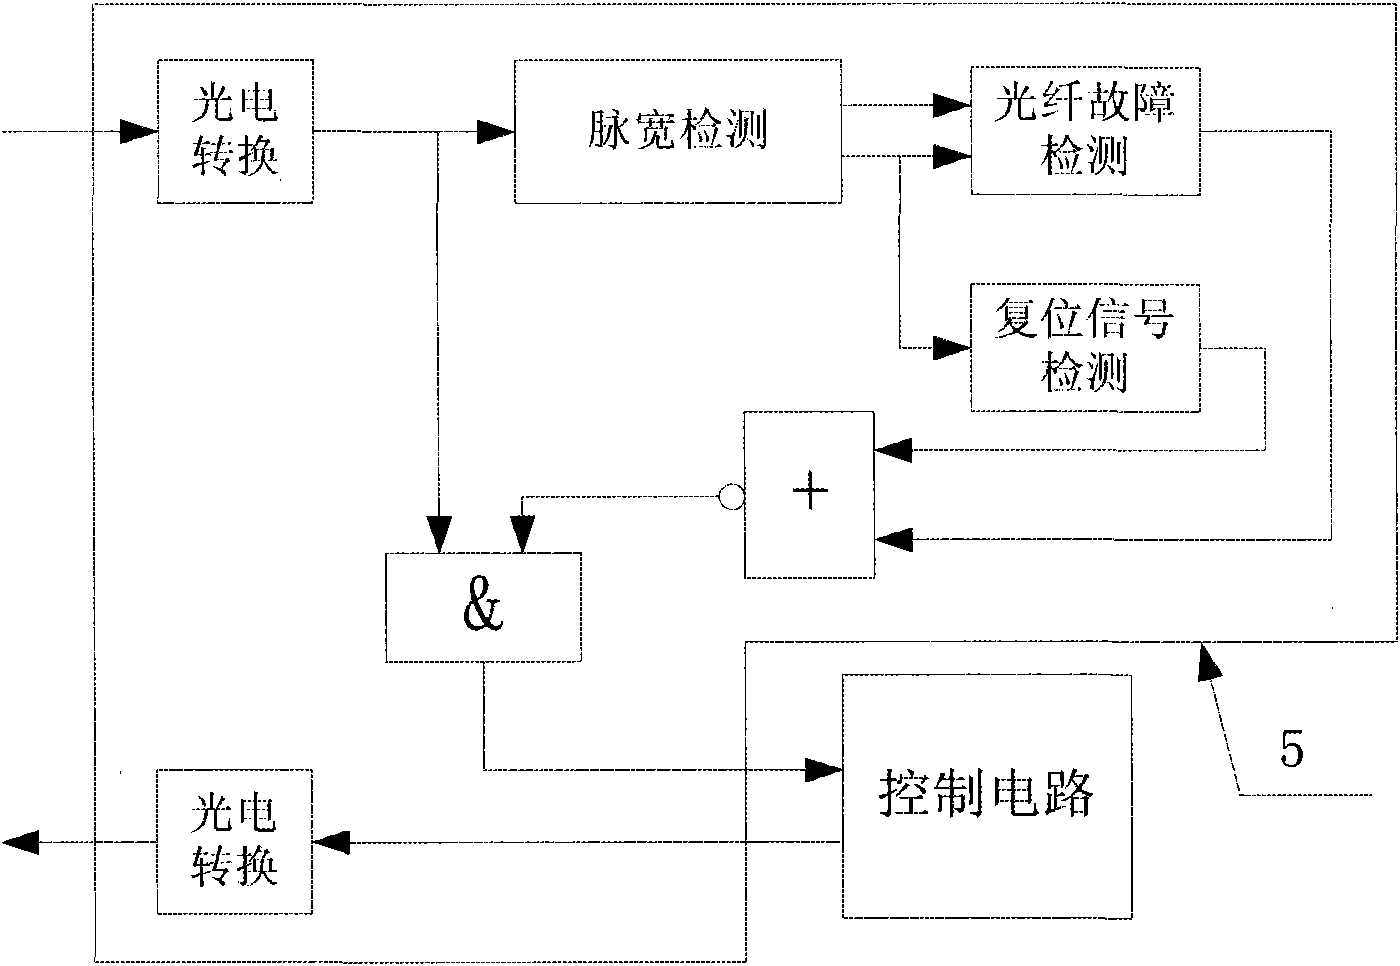 Electric and electronic power unit module